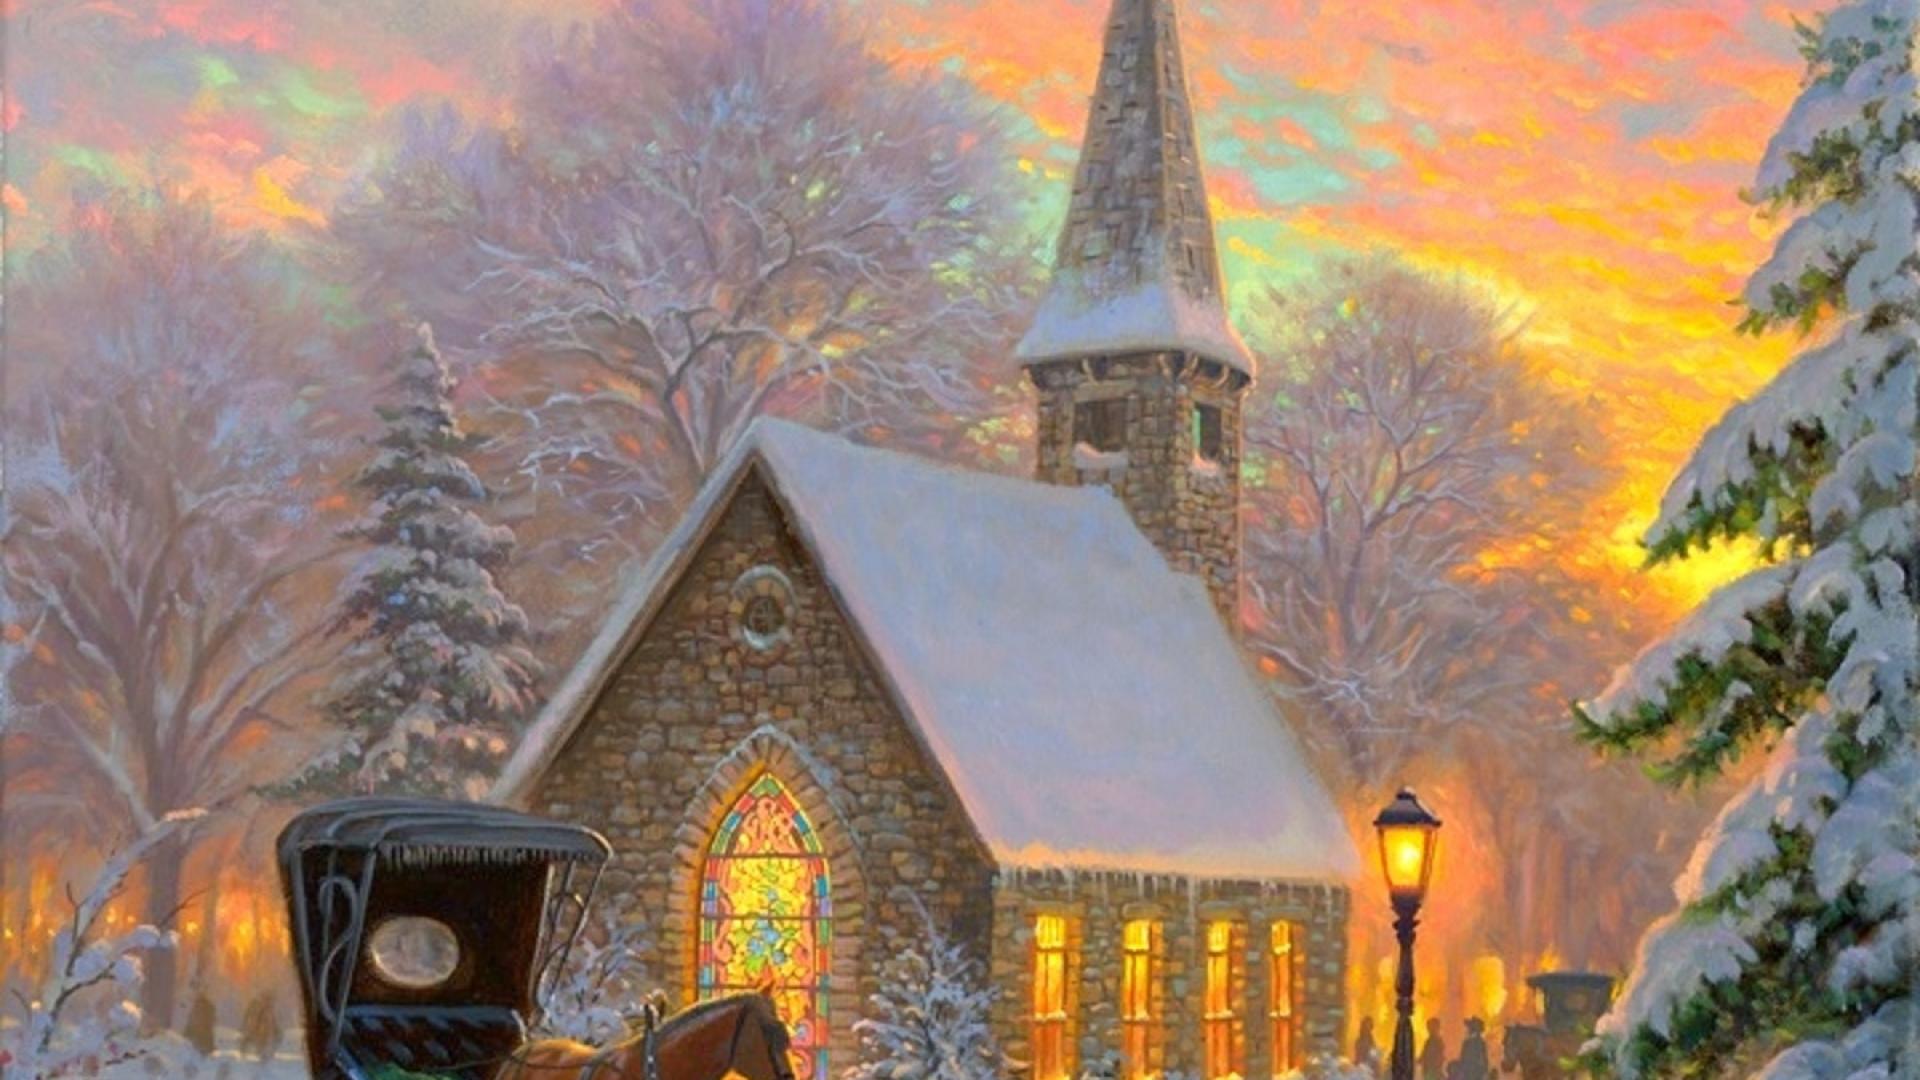 artistic, winter, carriage, chapel, church, horse, religious, steeple phone wallpaper